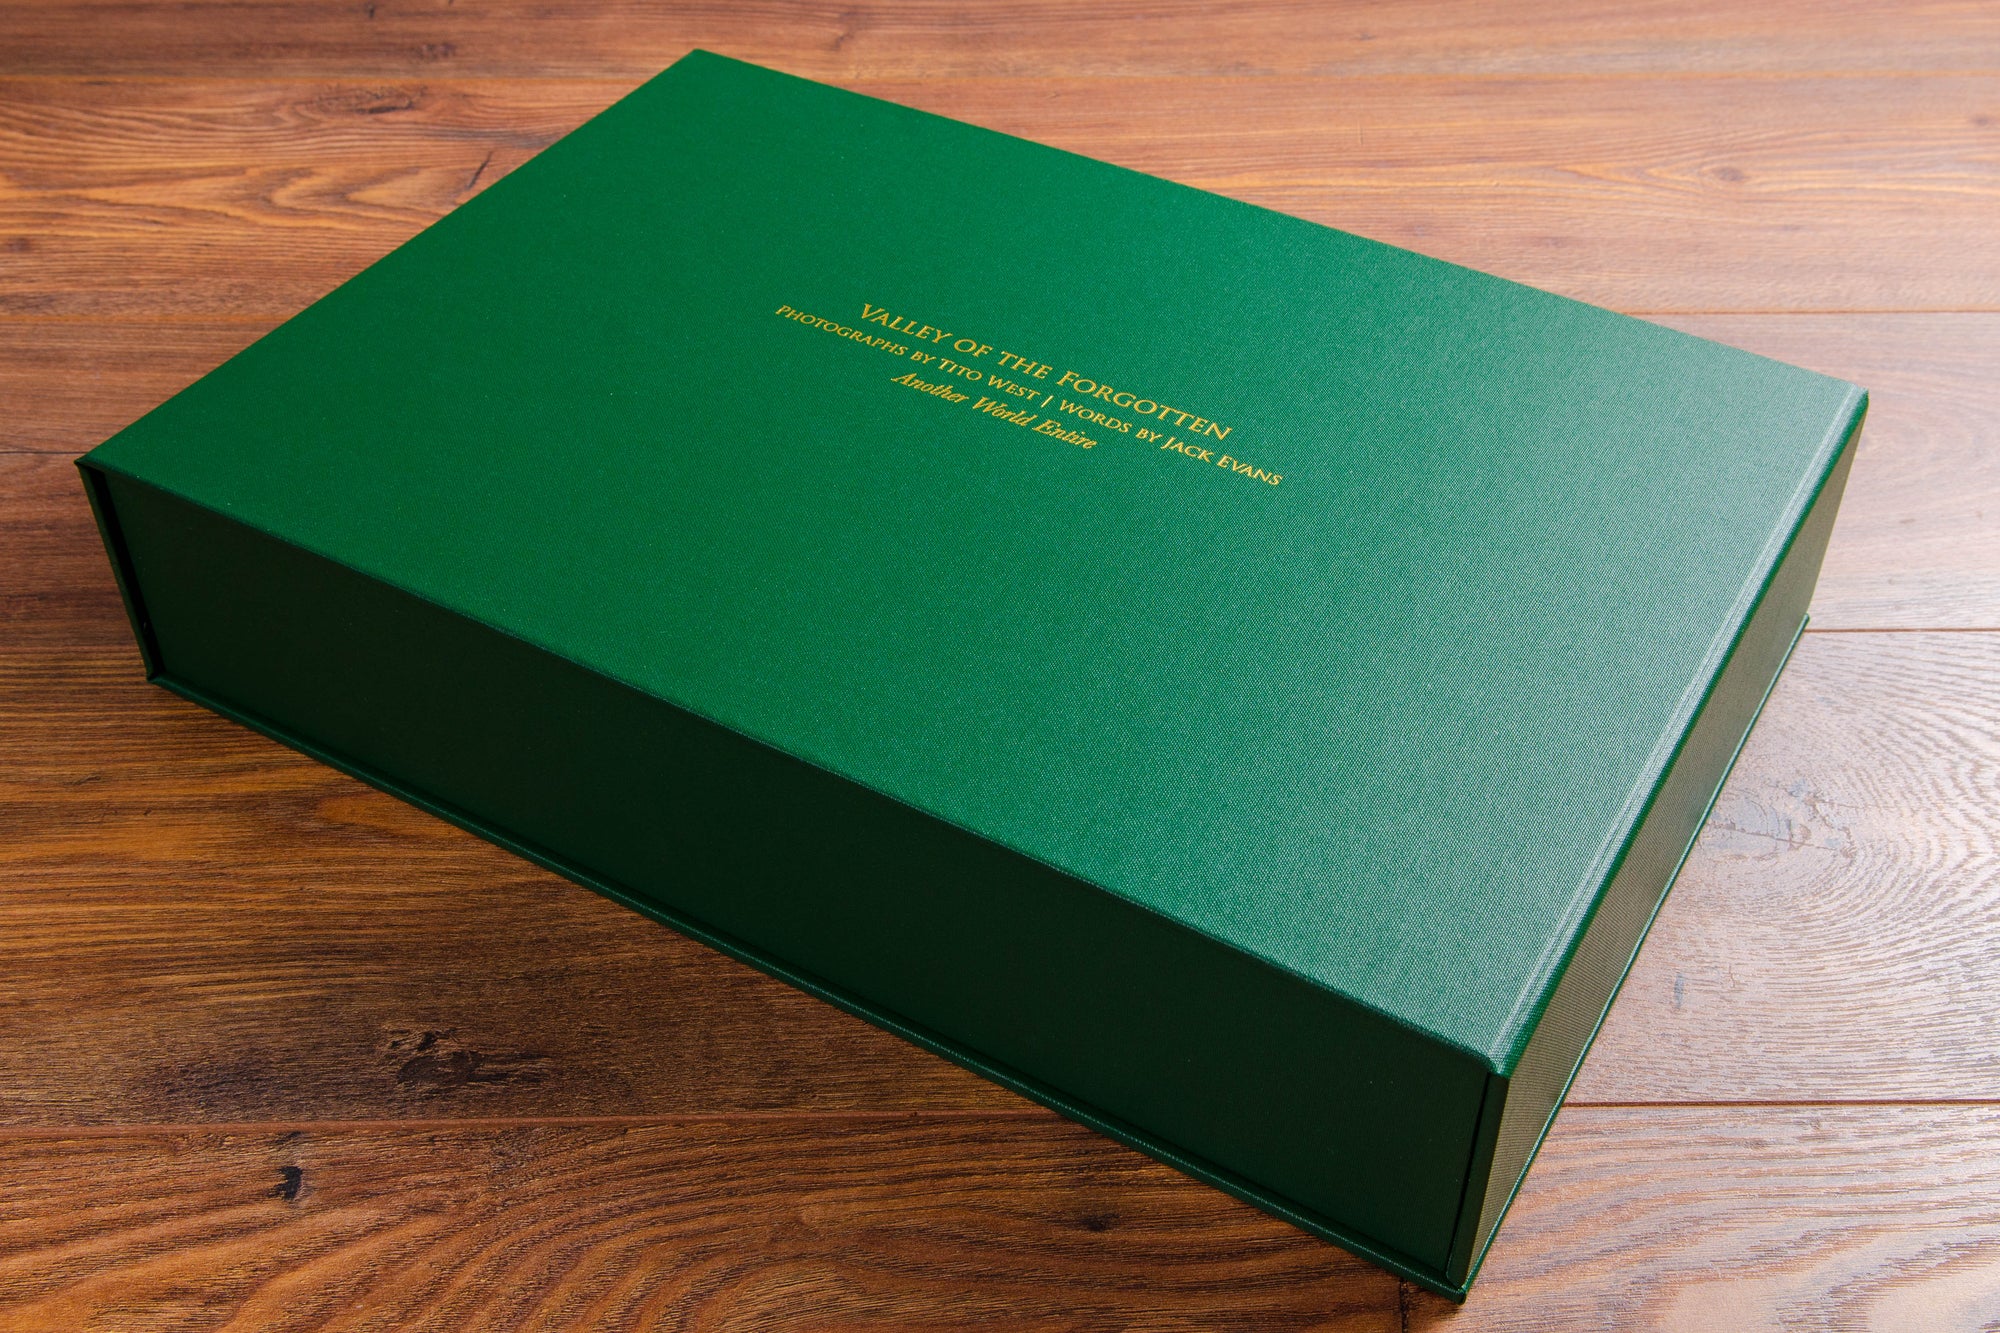 Portfolio box. Product - Clamshell box. Size is 11x17 inches. Colour is green buckram. Personalisation is full colour UV printing